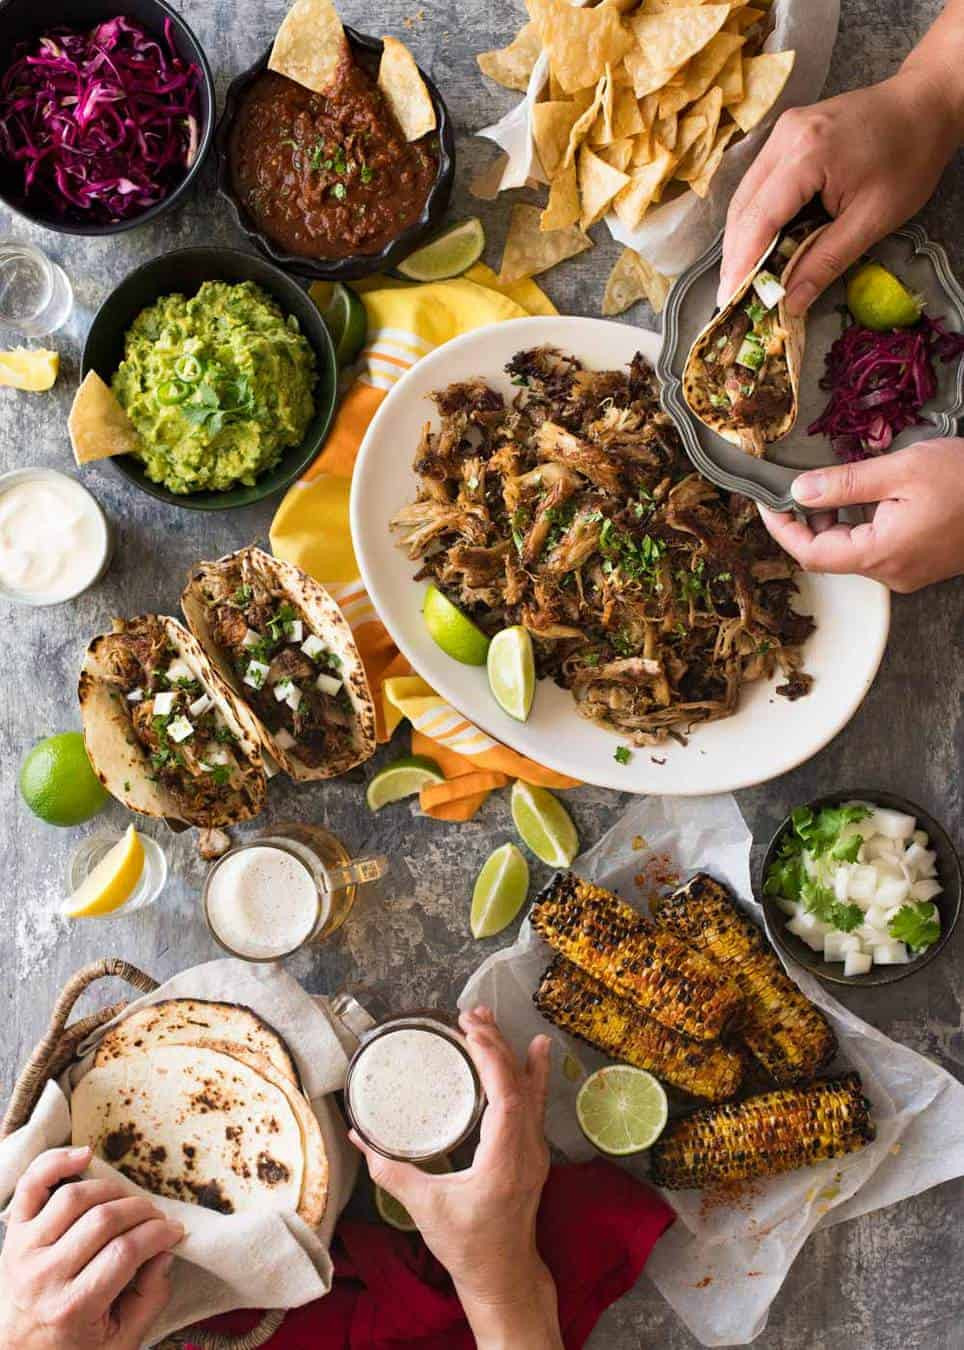 Mexican Dinner Party Menu Ideas
 A Big Mexican Fiesta That s Easy to Make